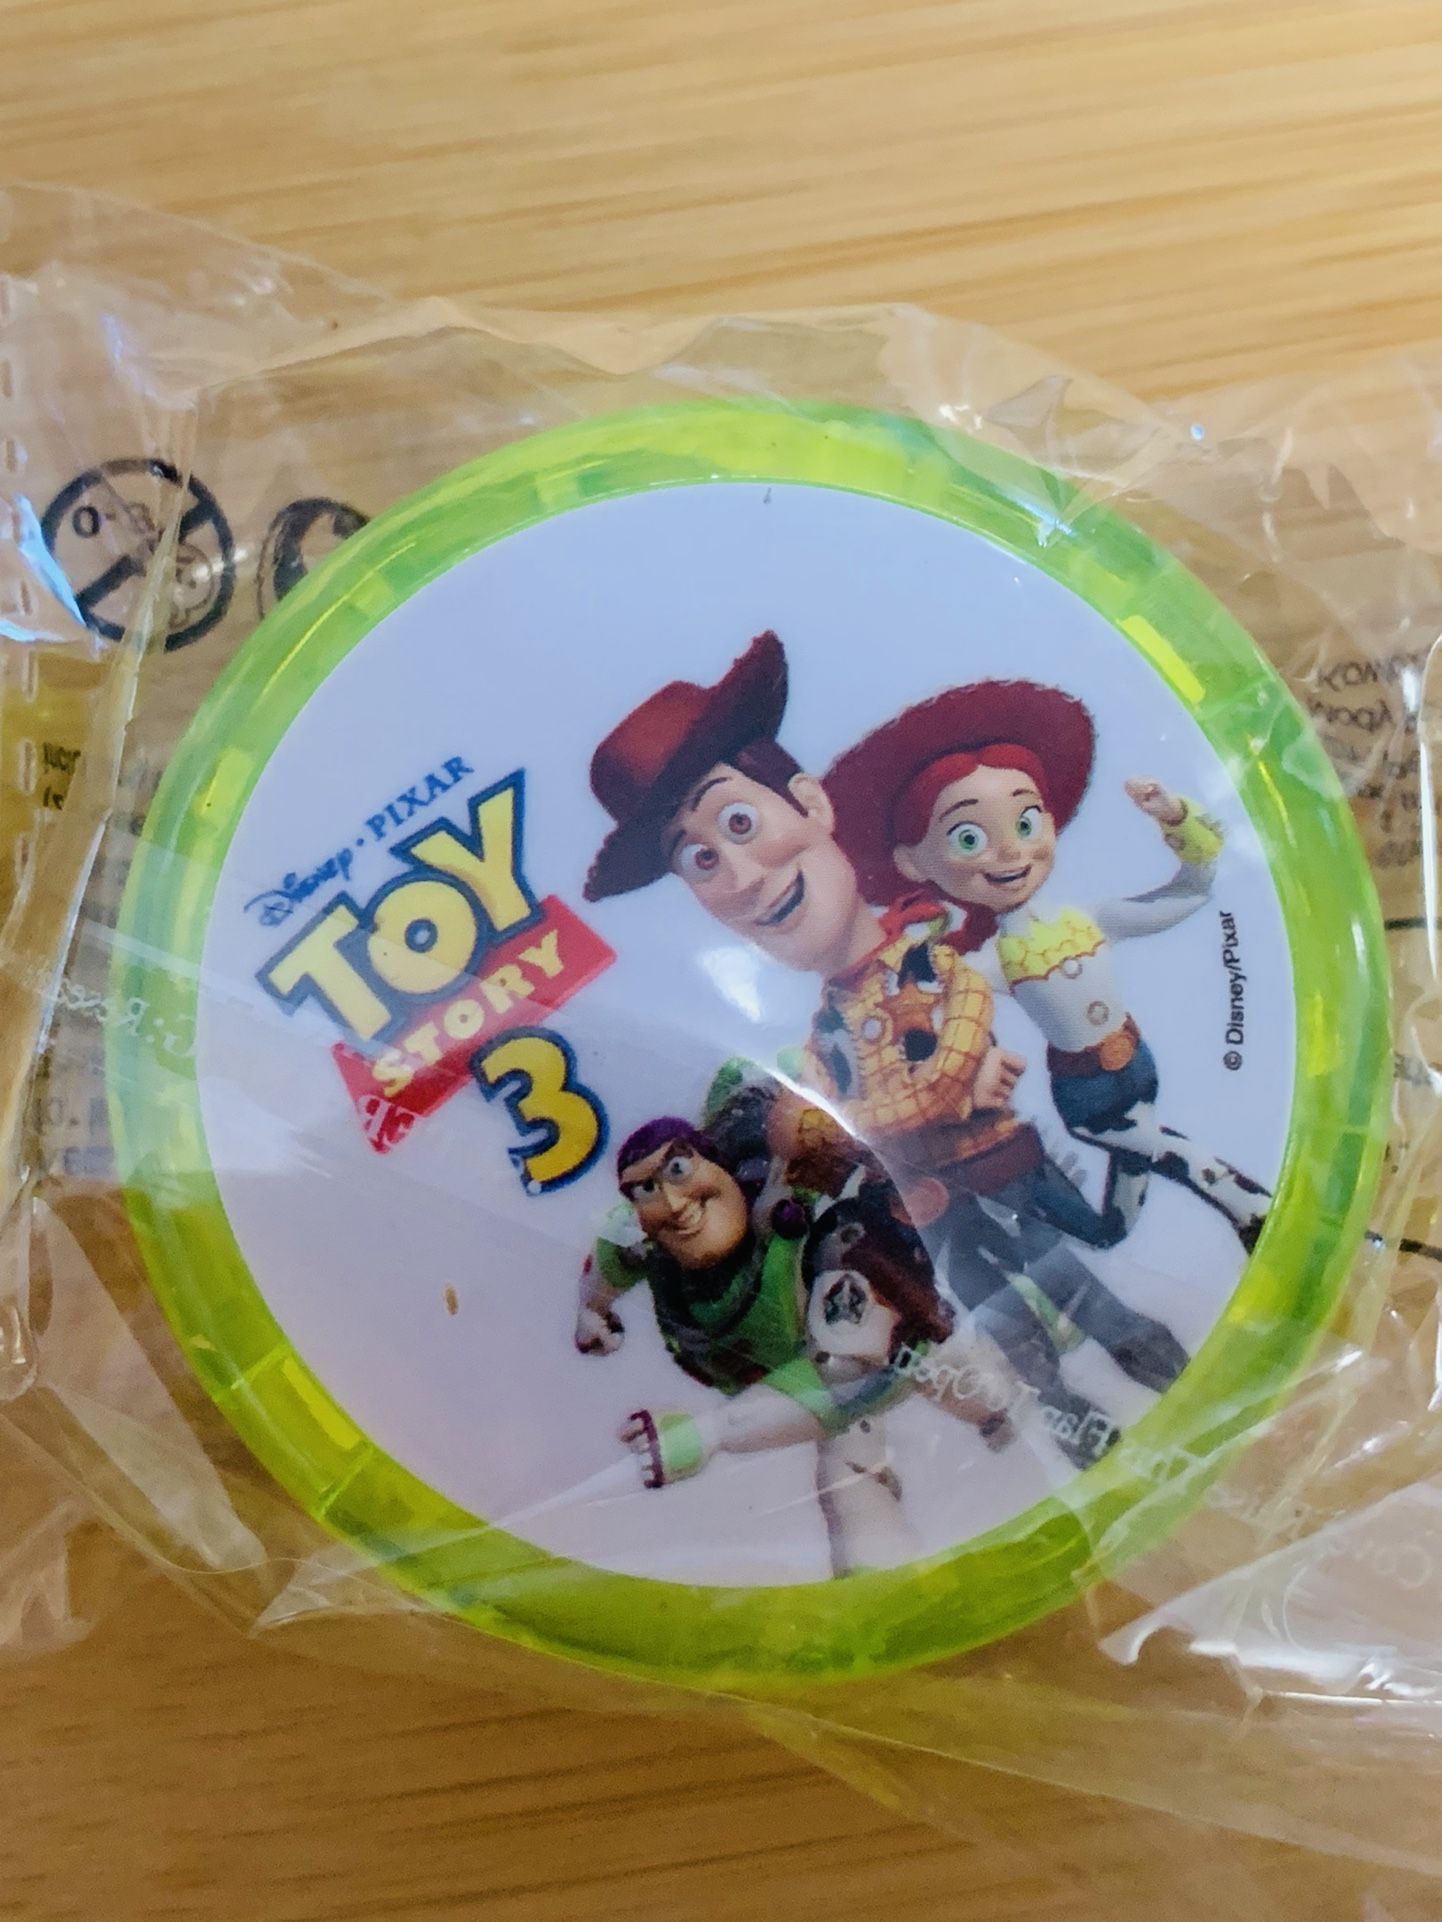 TOY STORY 3 MOVIE PREMIERE GIVE-A-WAY PROMOTIONAL SEALED YO-YO JUNE 18 2010 DISNEY PIXAR - This One Not Sold In Stores** UNOPENED**